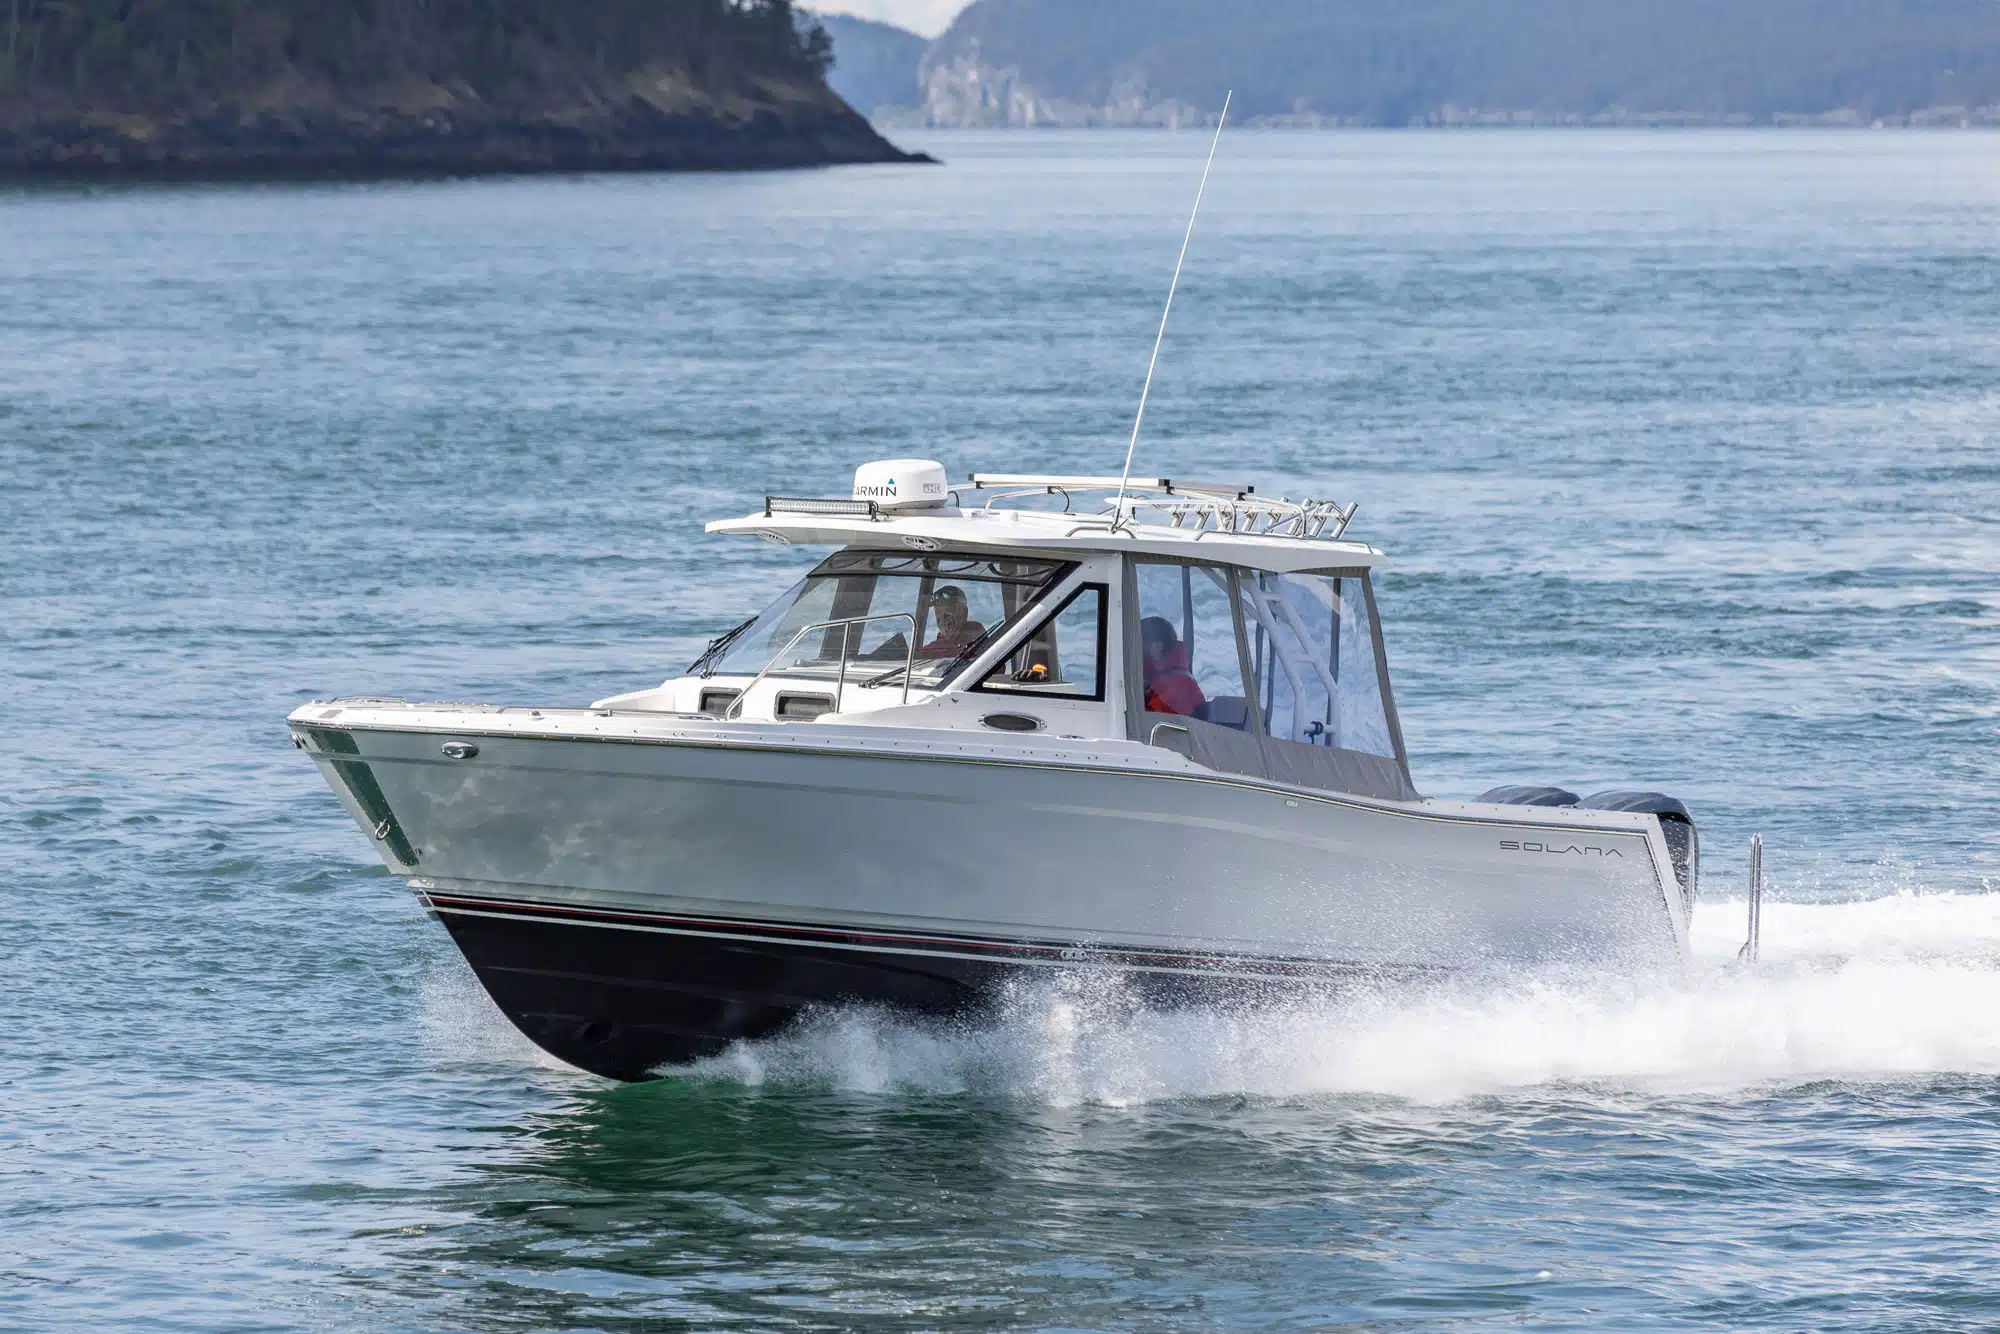 Solara Boats Welcomes Boston Yacht Sales To Their Dealer Network!